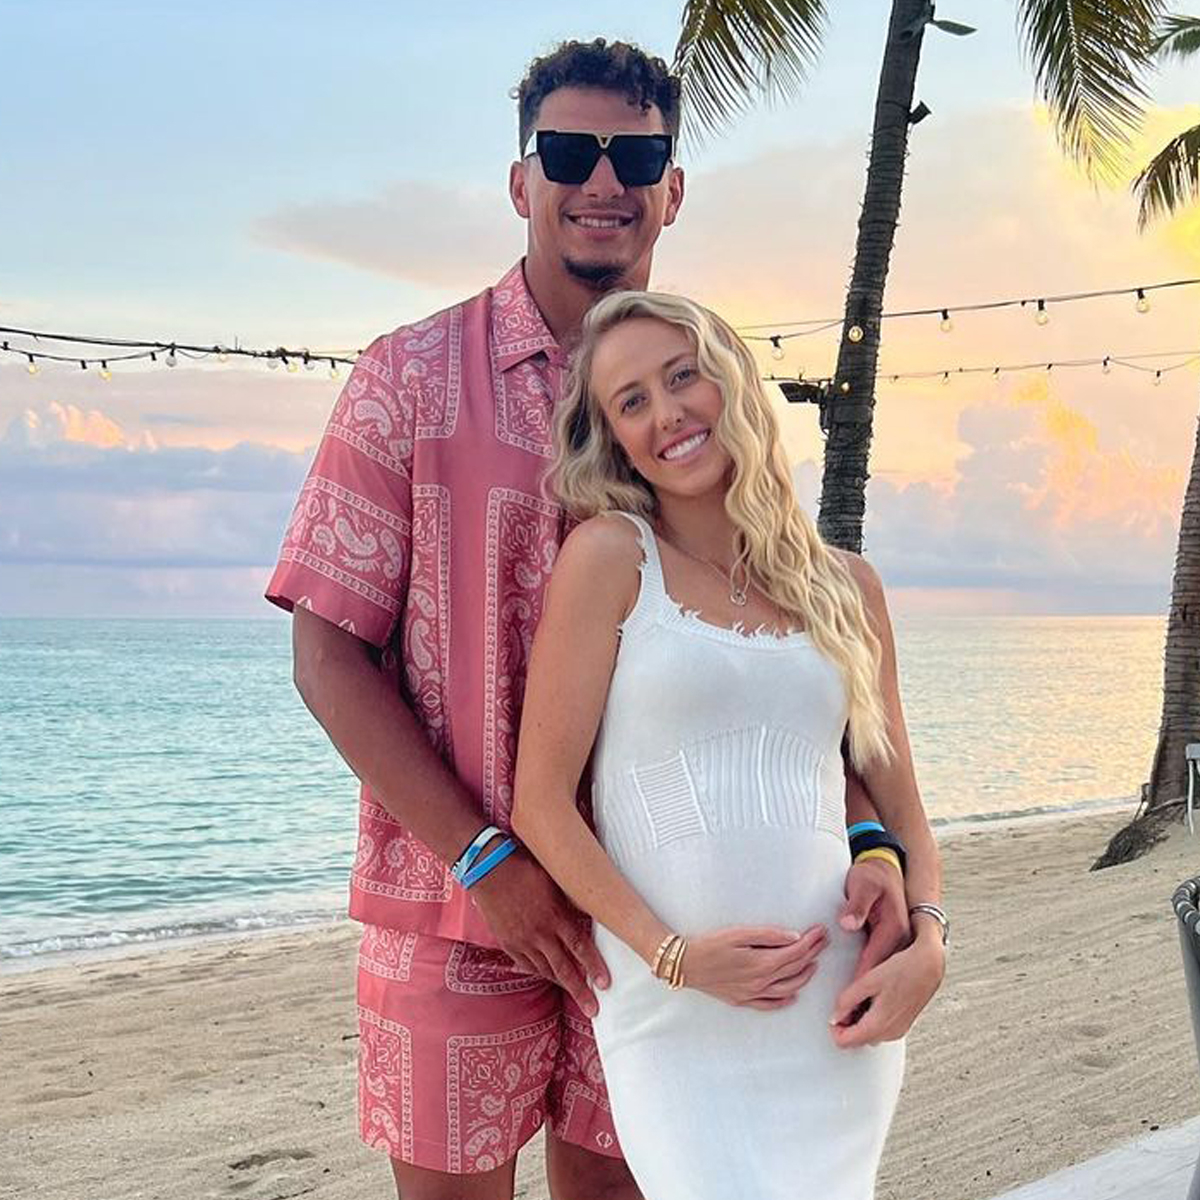 Who Is Patrick Mahomes' Wife? Meet Brittany Mahomes, Who's Sitting